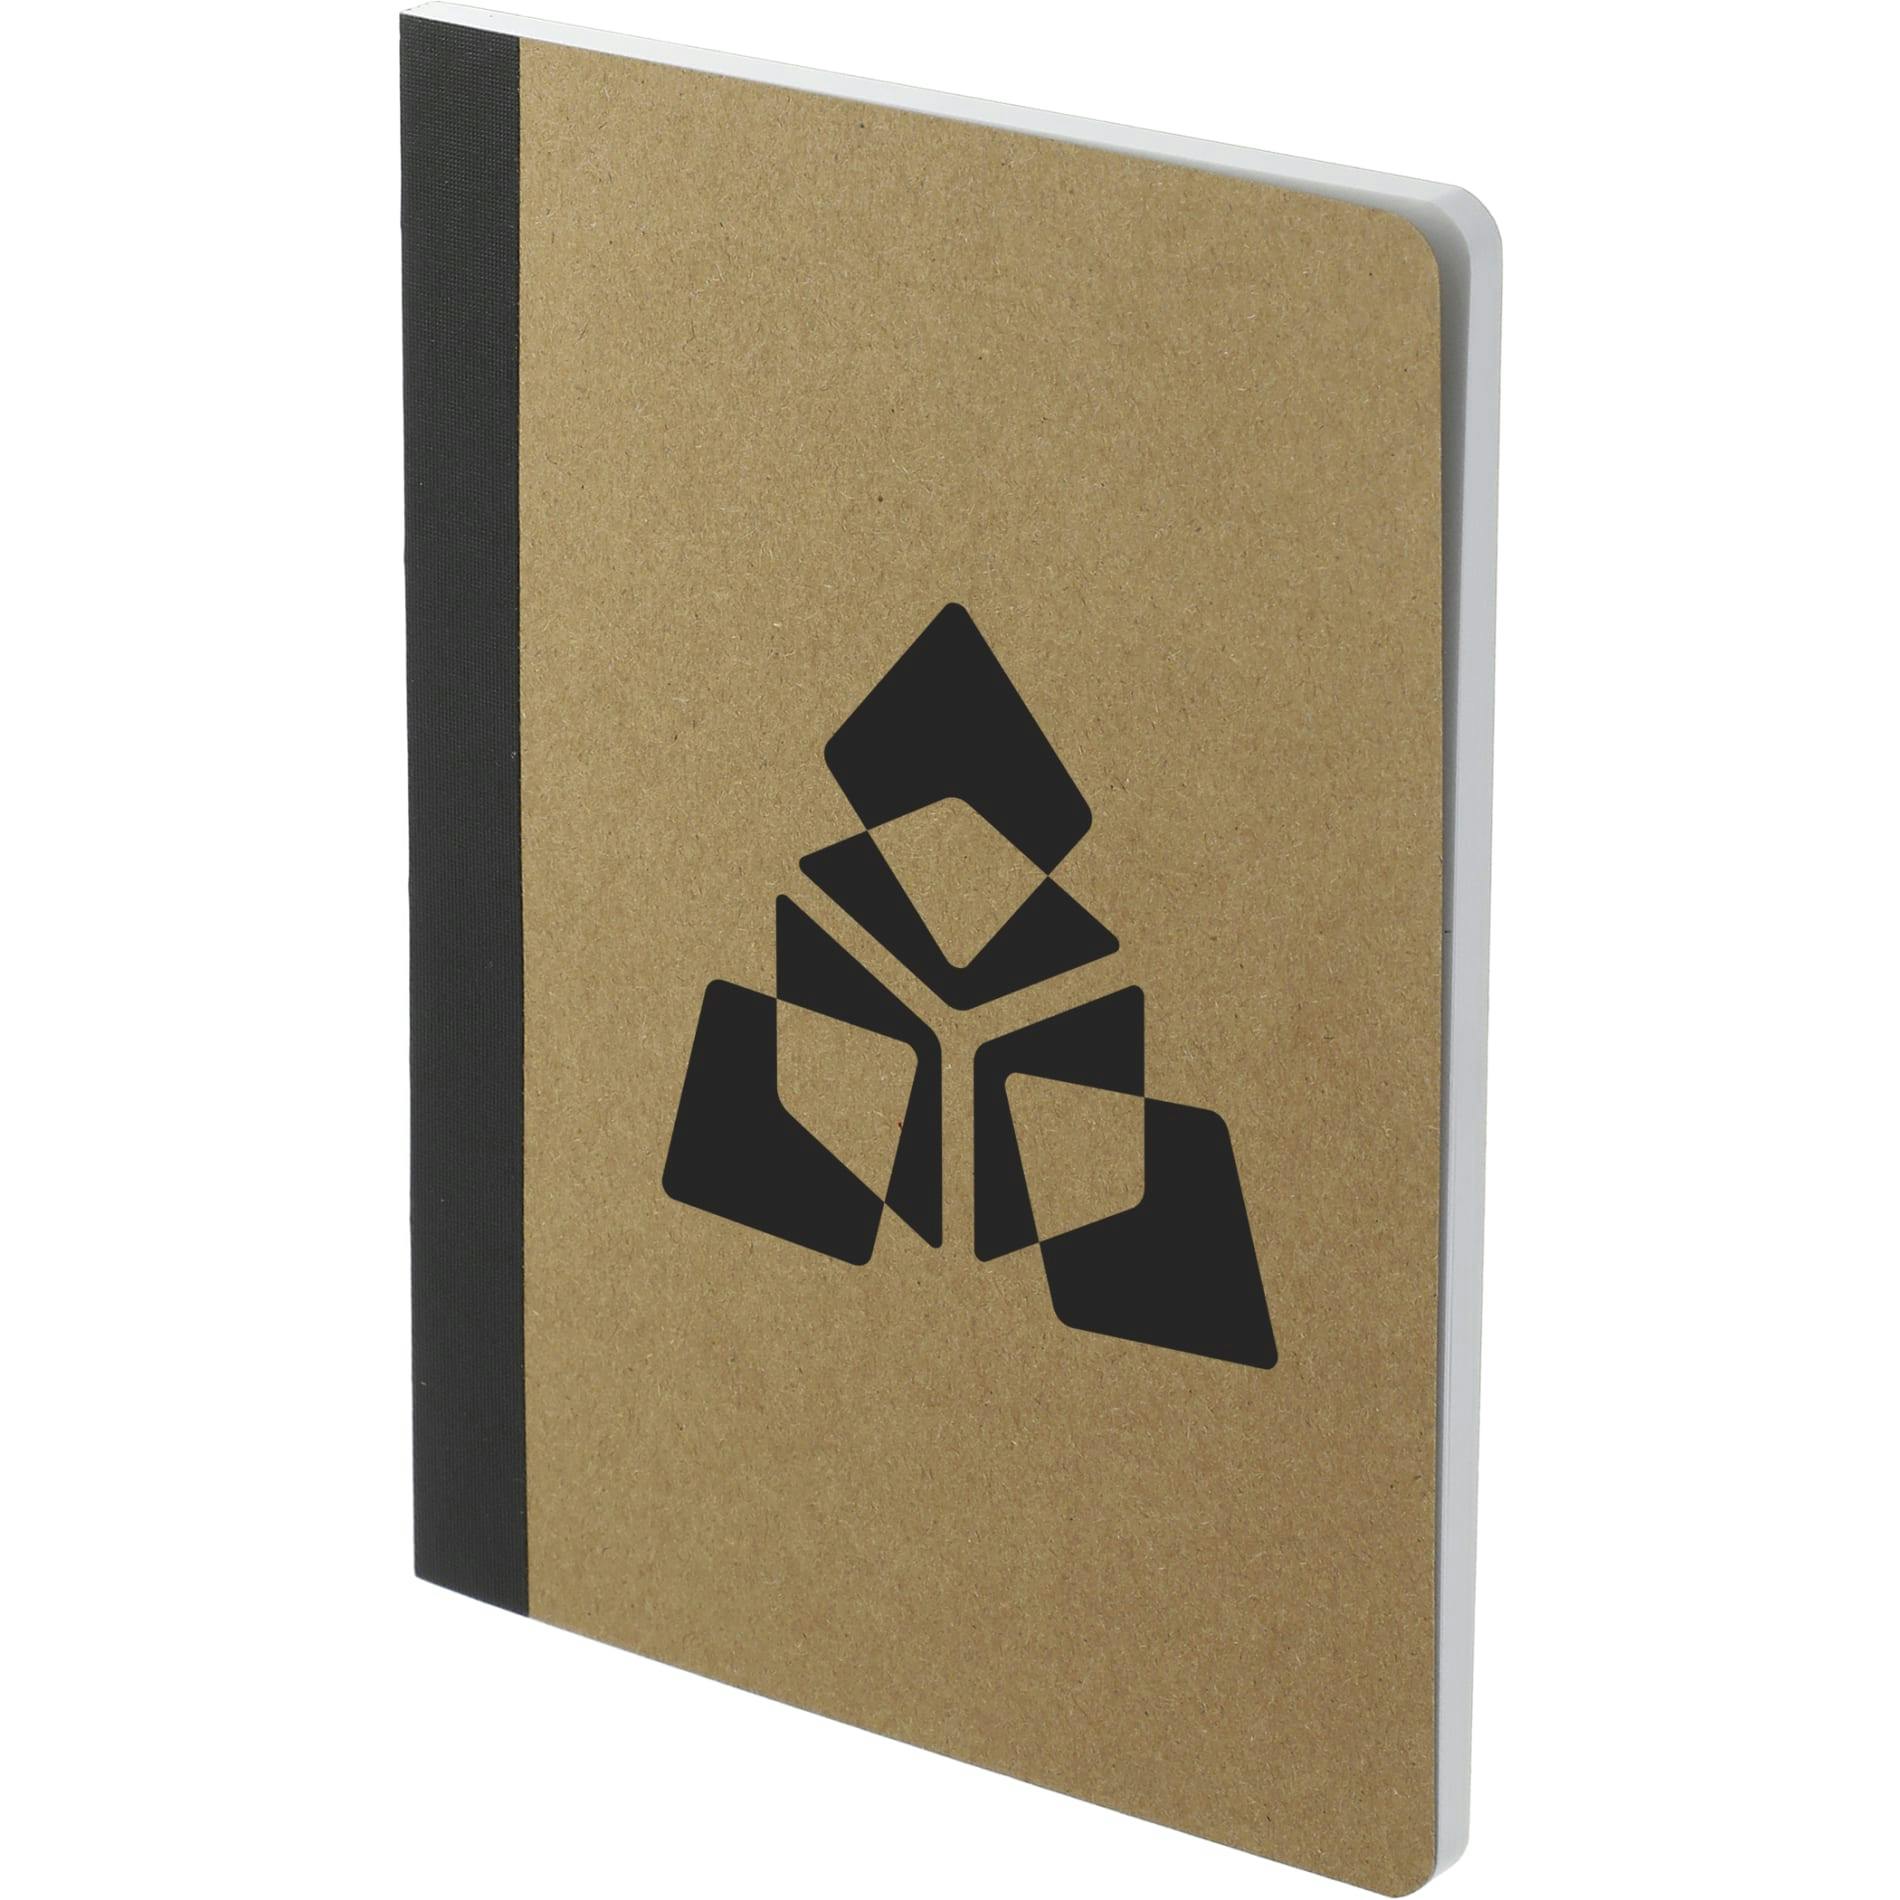 5" x 7" FSC® Mix Composition Notebook - additional Image 3